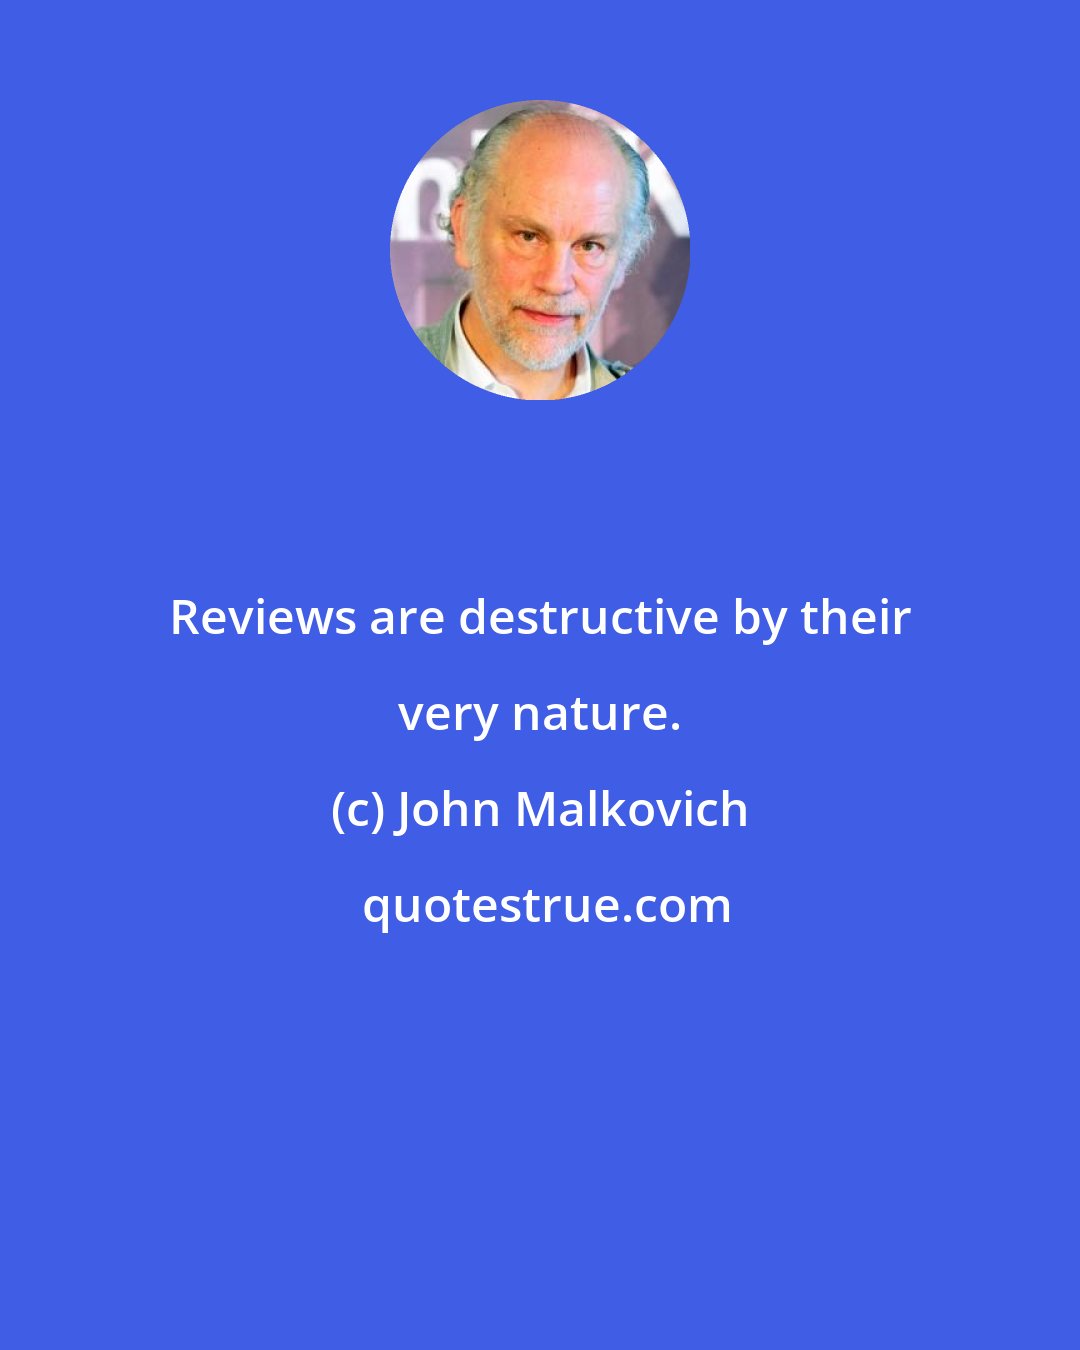 John Malkovich: Reviews are destructive by their very nature.